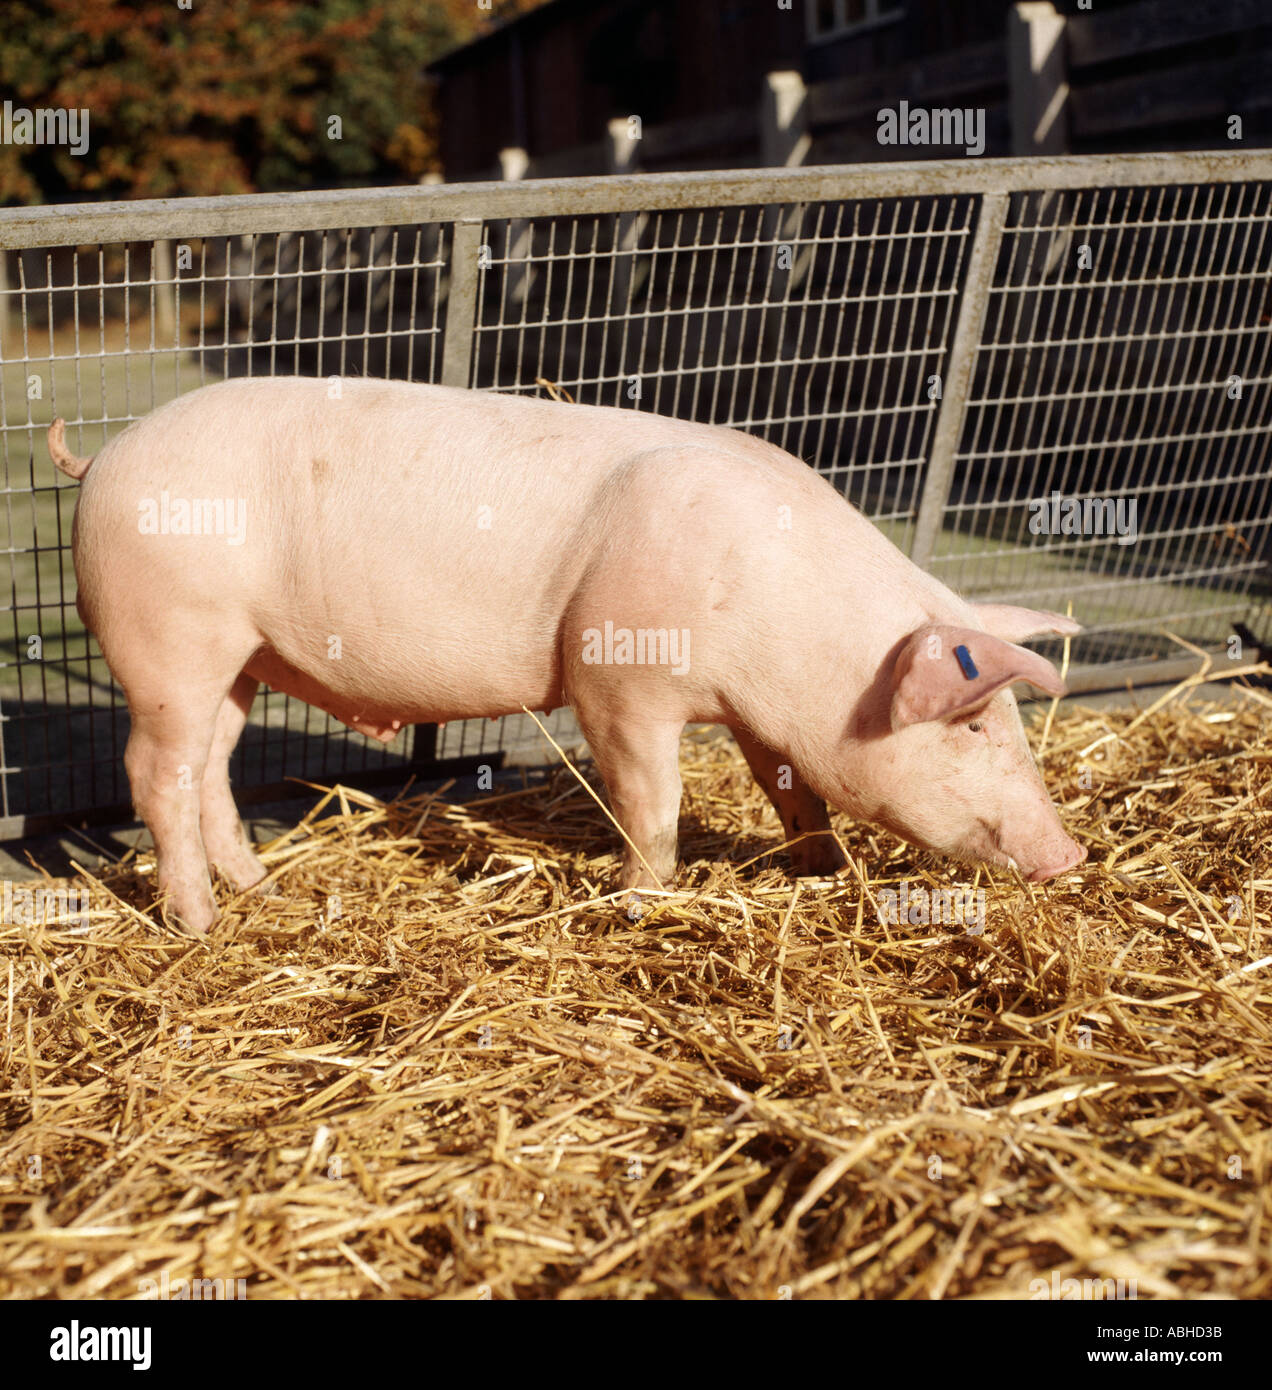 Young large white boar pig in outdoor pen with straw bedding pig Stock Photo